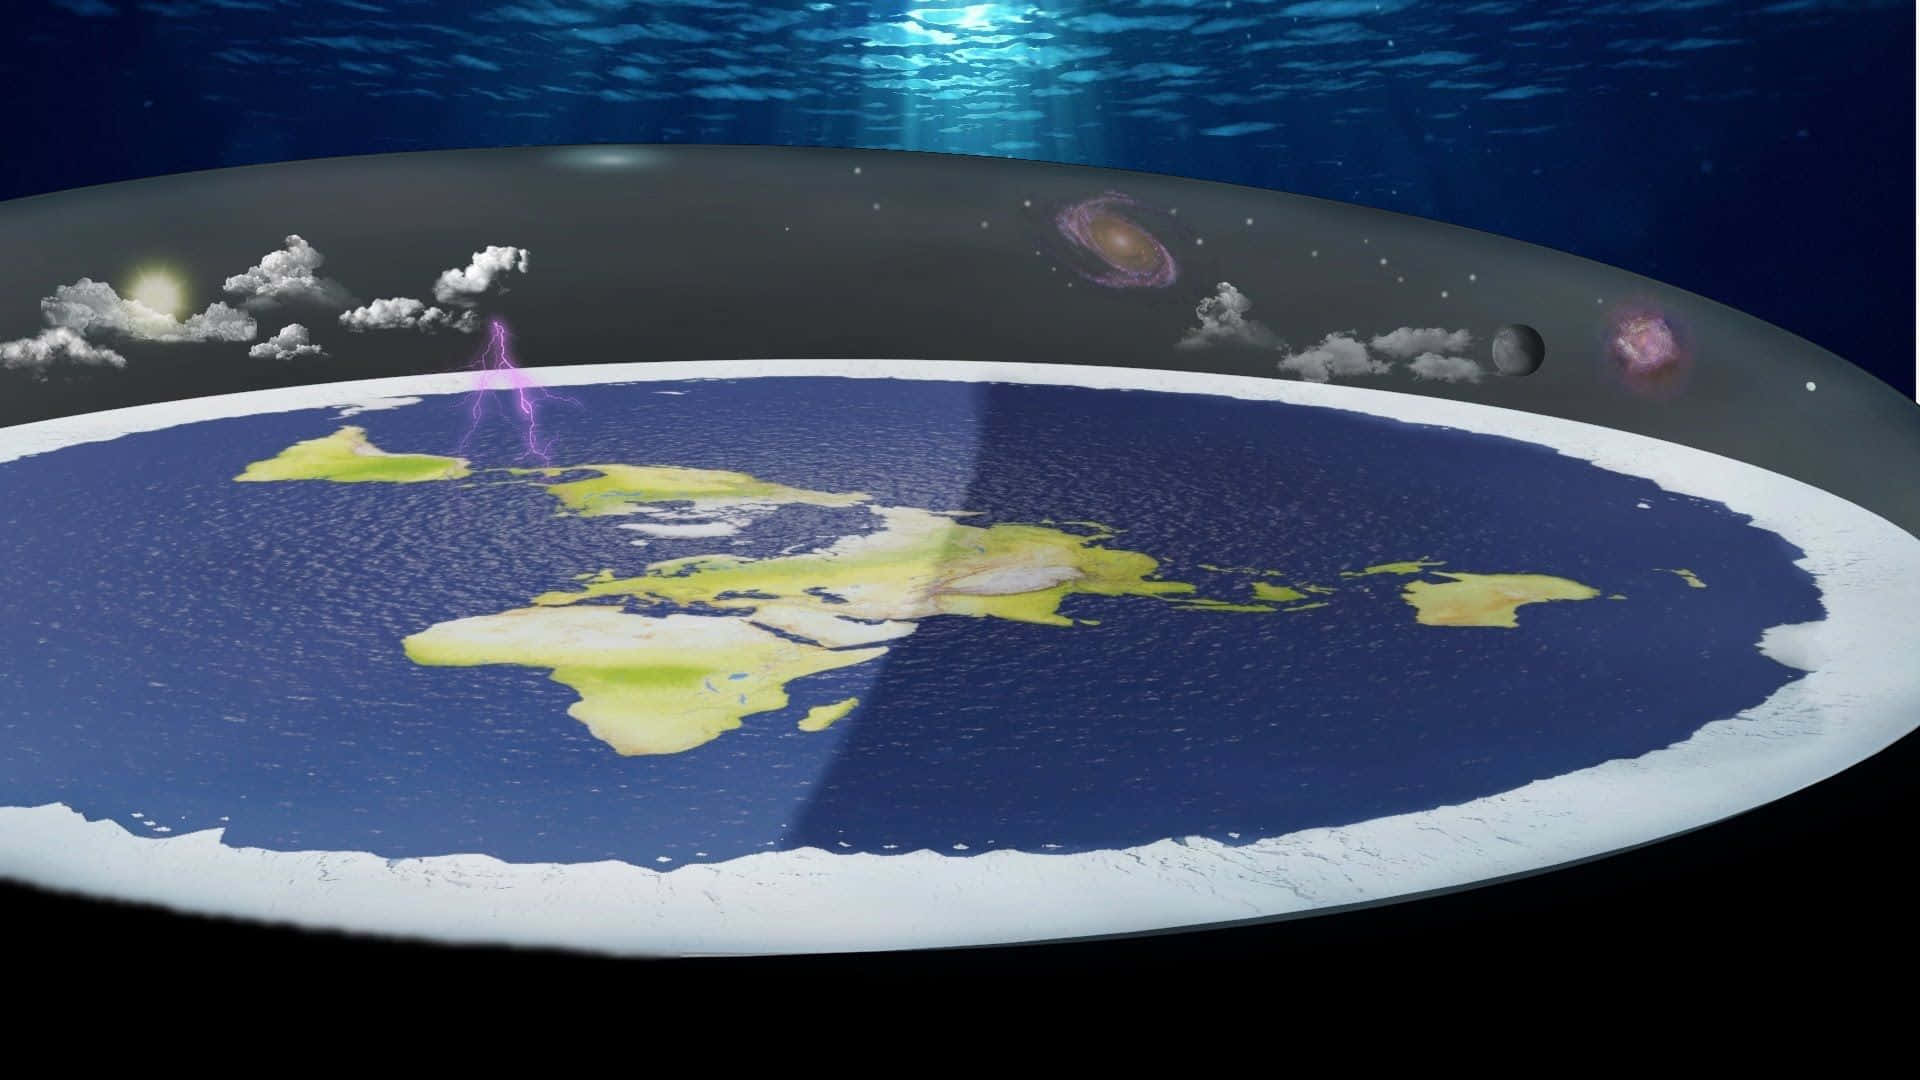 The Earth Is Shown In The Ocean